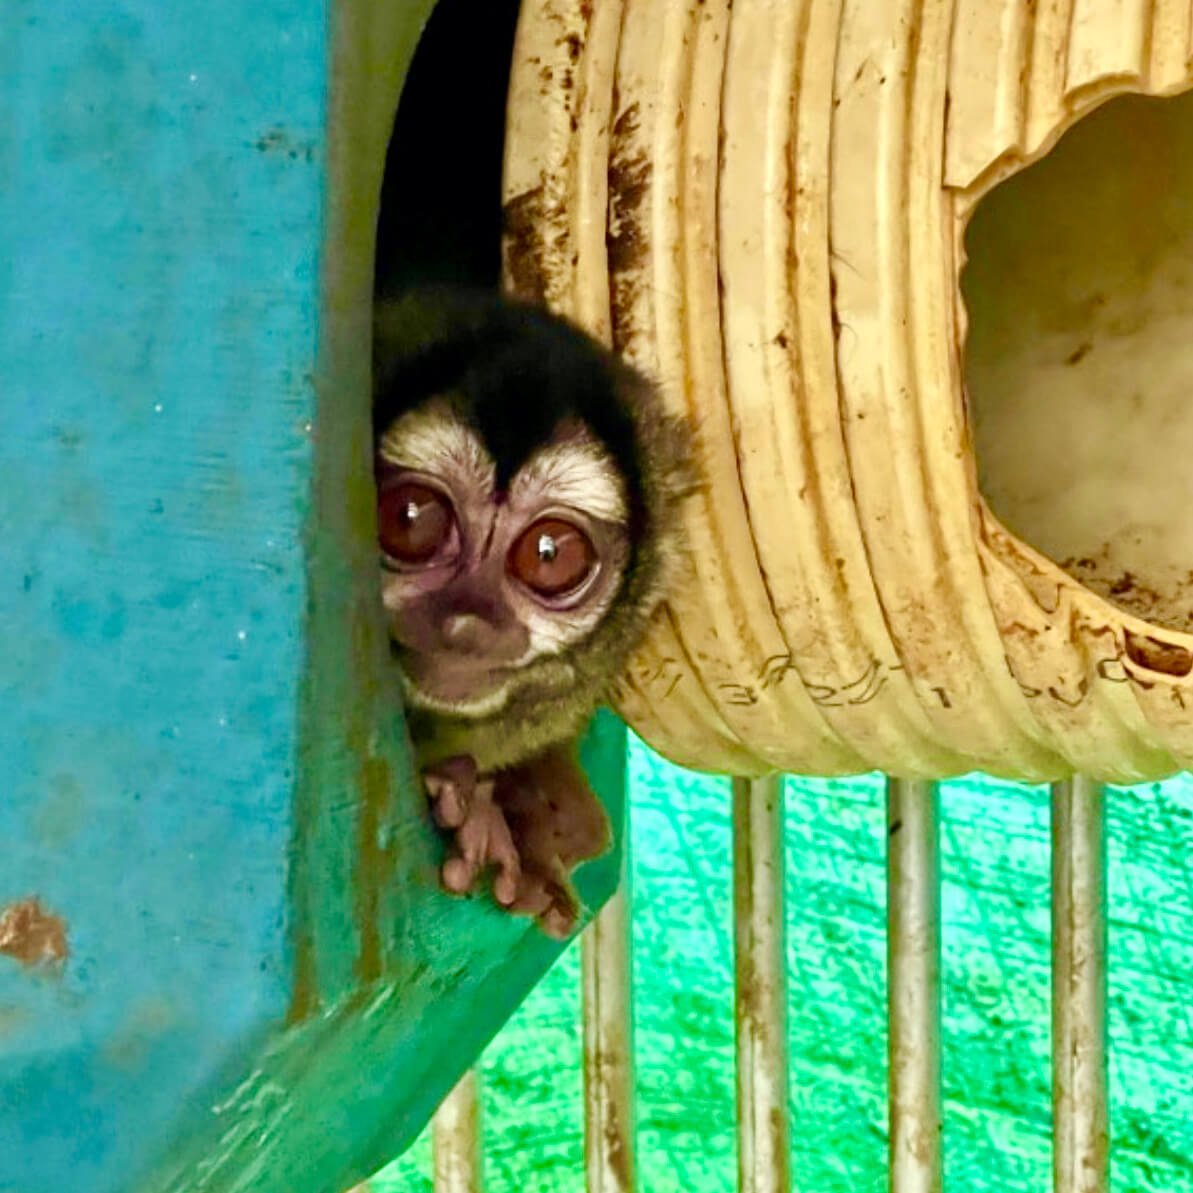 VIV Colombian Fundacion Centro de Primates FUCEP An Aotus monkey in a nest beside a soiled corrugated pipe also serving as a nest crop VS PO NIH-Funded Scam Facility Shut Down; 108 Monkeys Seized in Colombia